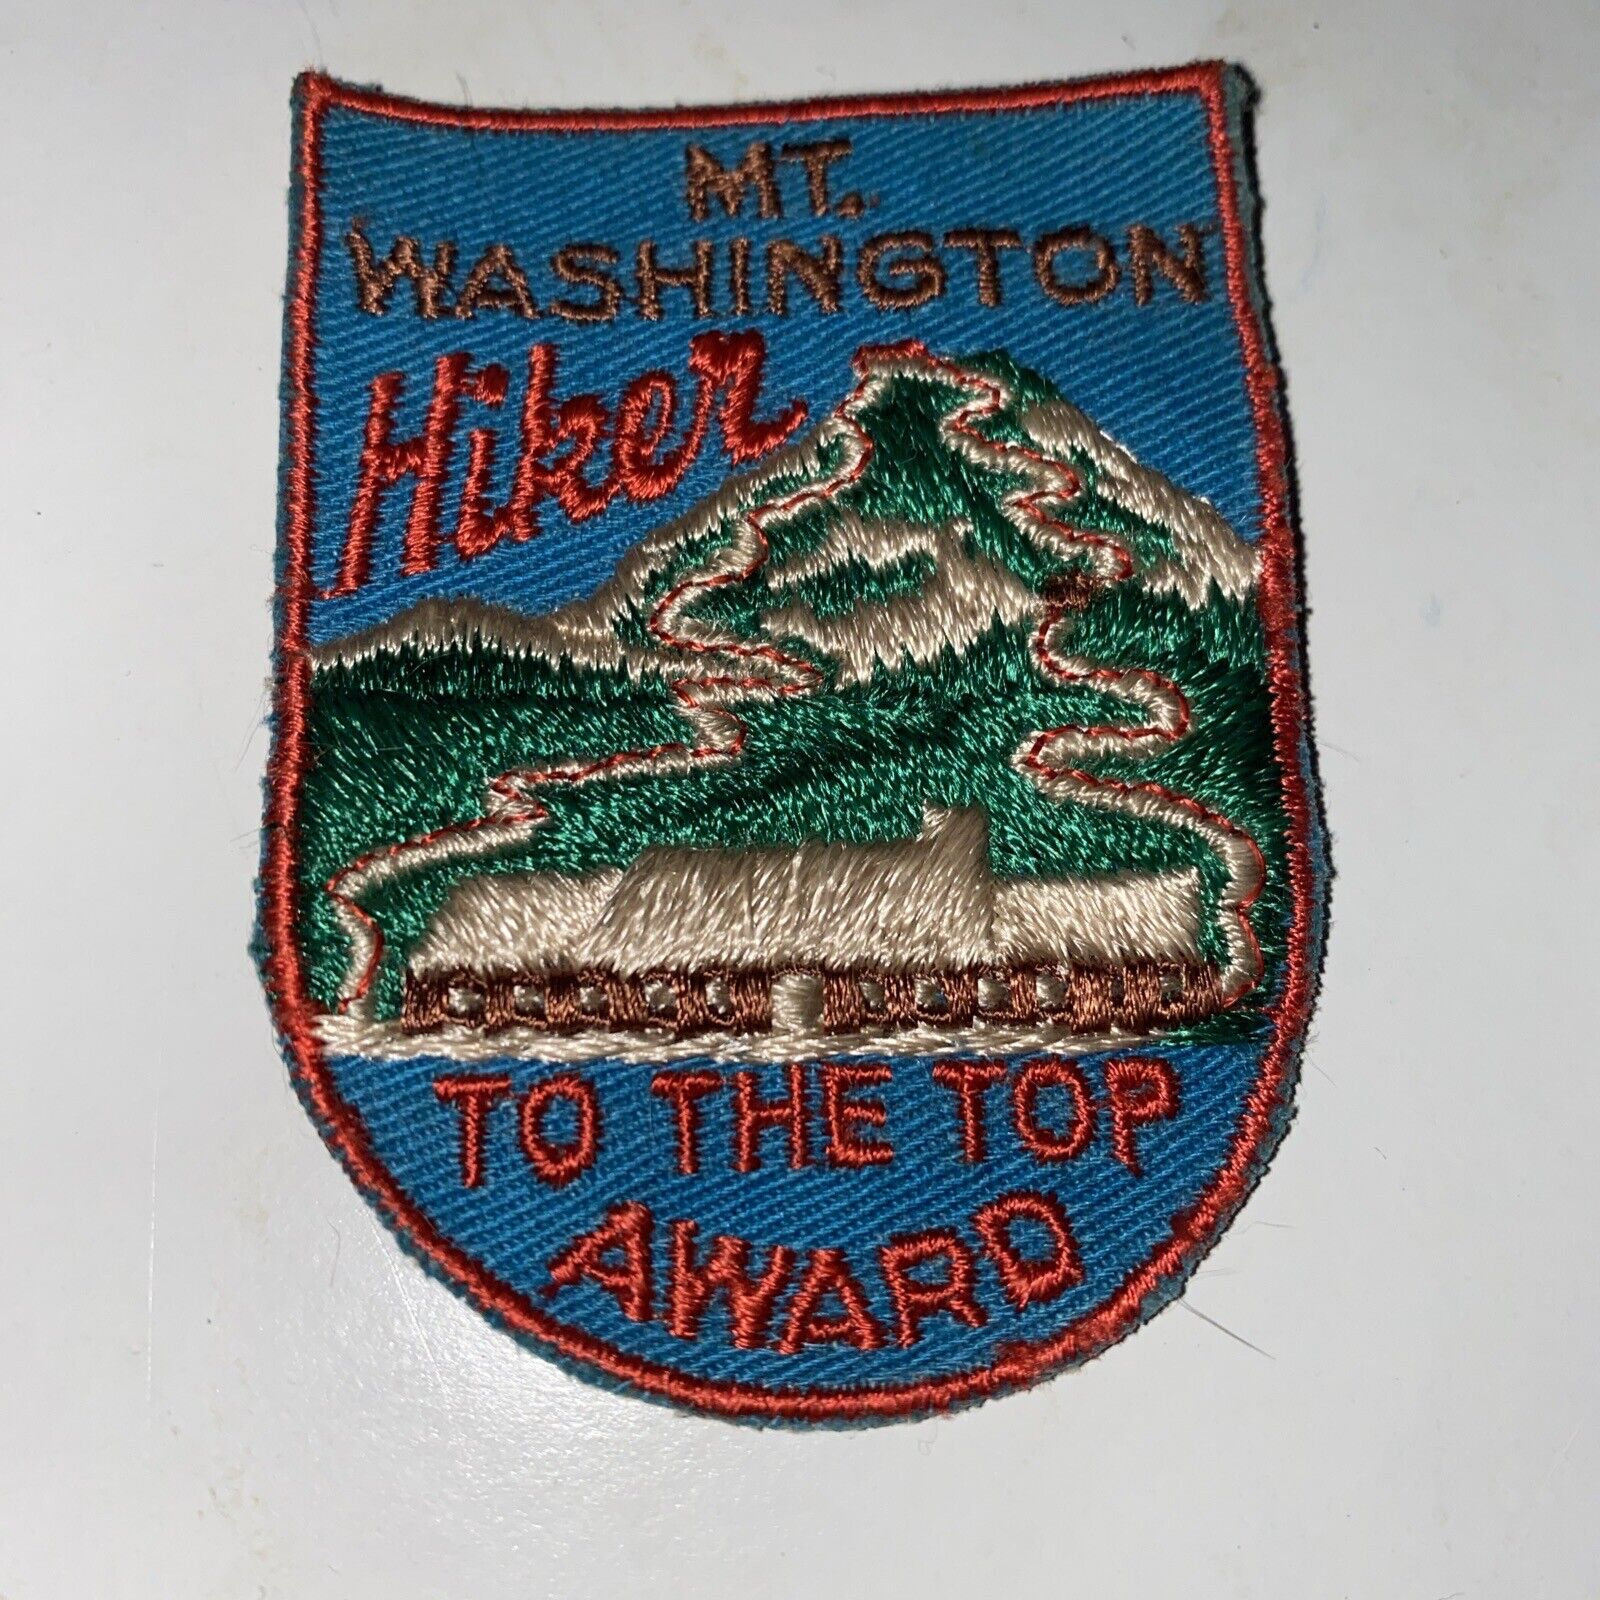 Vintage Mount Washington New Hampshire Hiker To The Top Award Patch Voyager Used